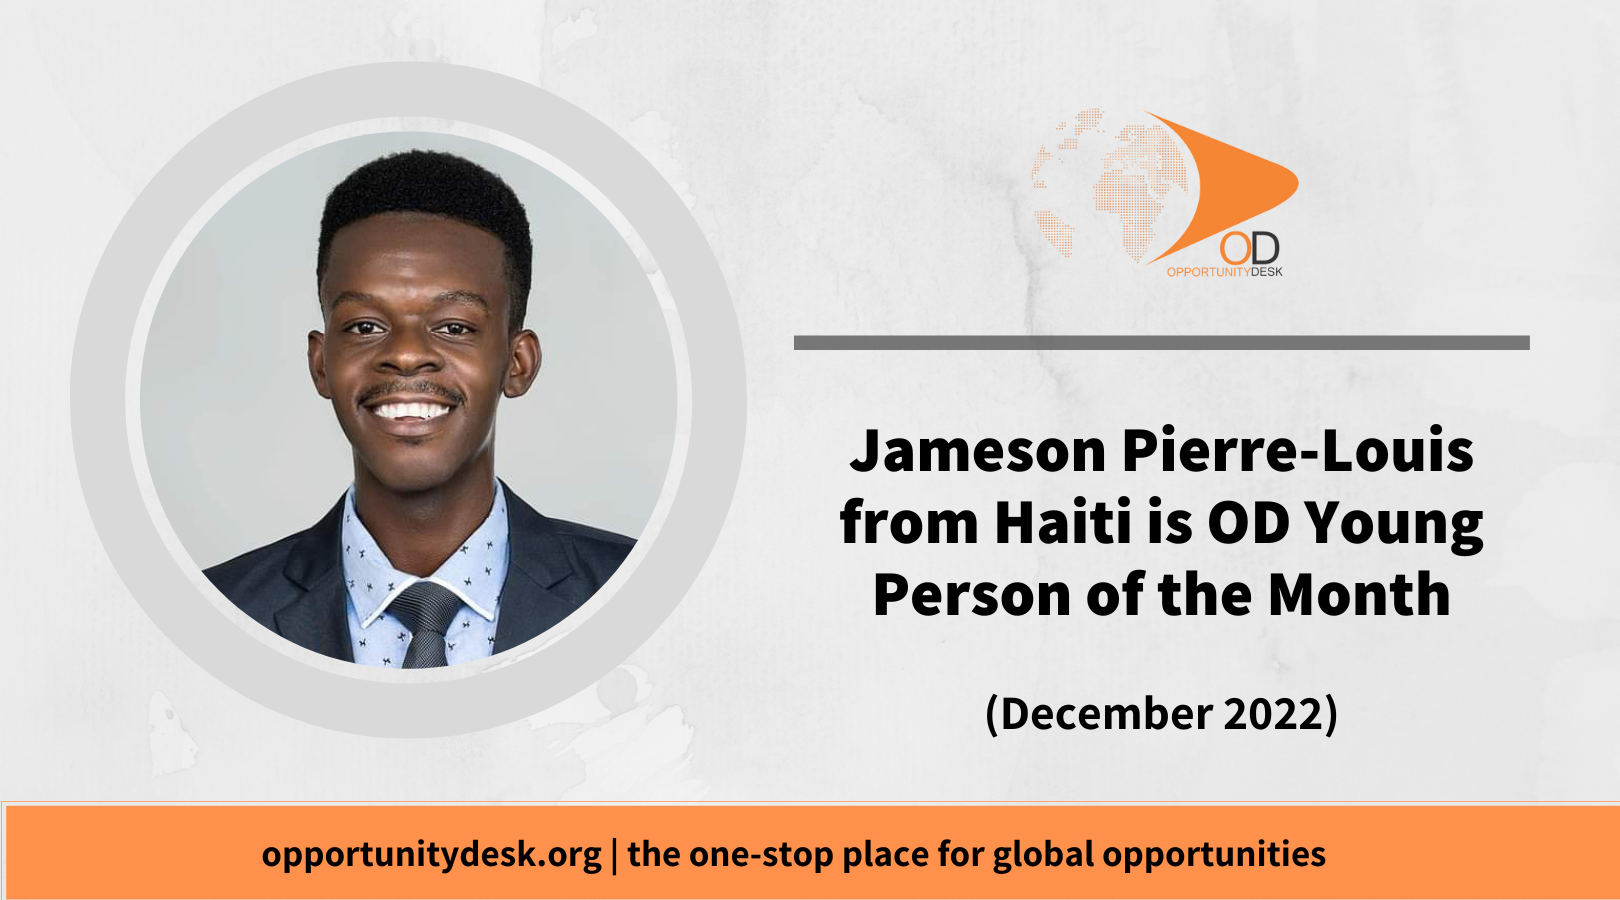 Jameson Pierre-Louis from Haiti is OD Young Person of The Month for December 2022